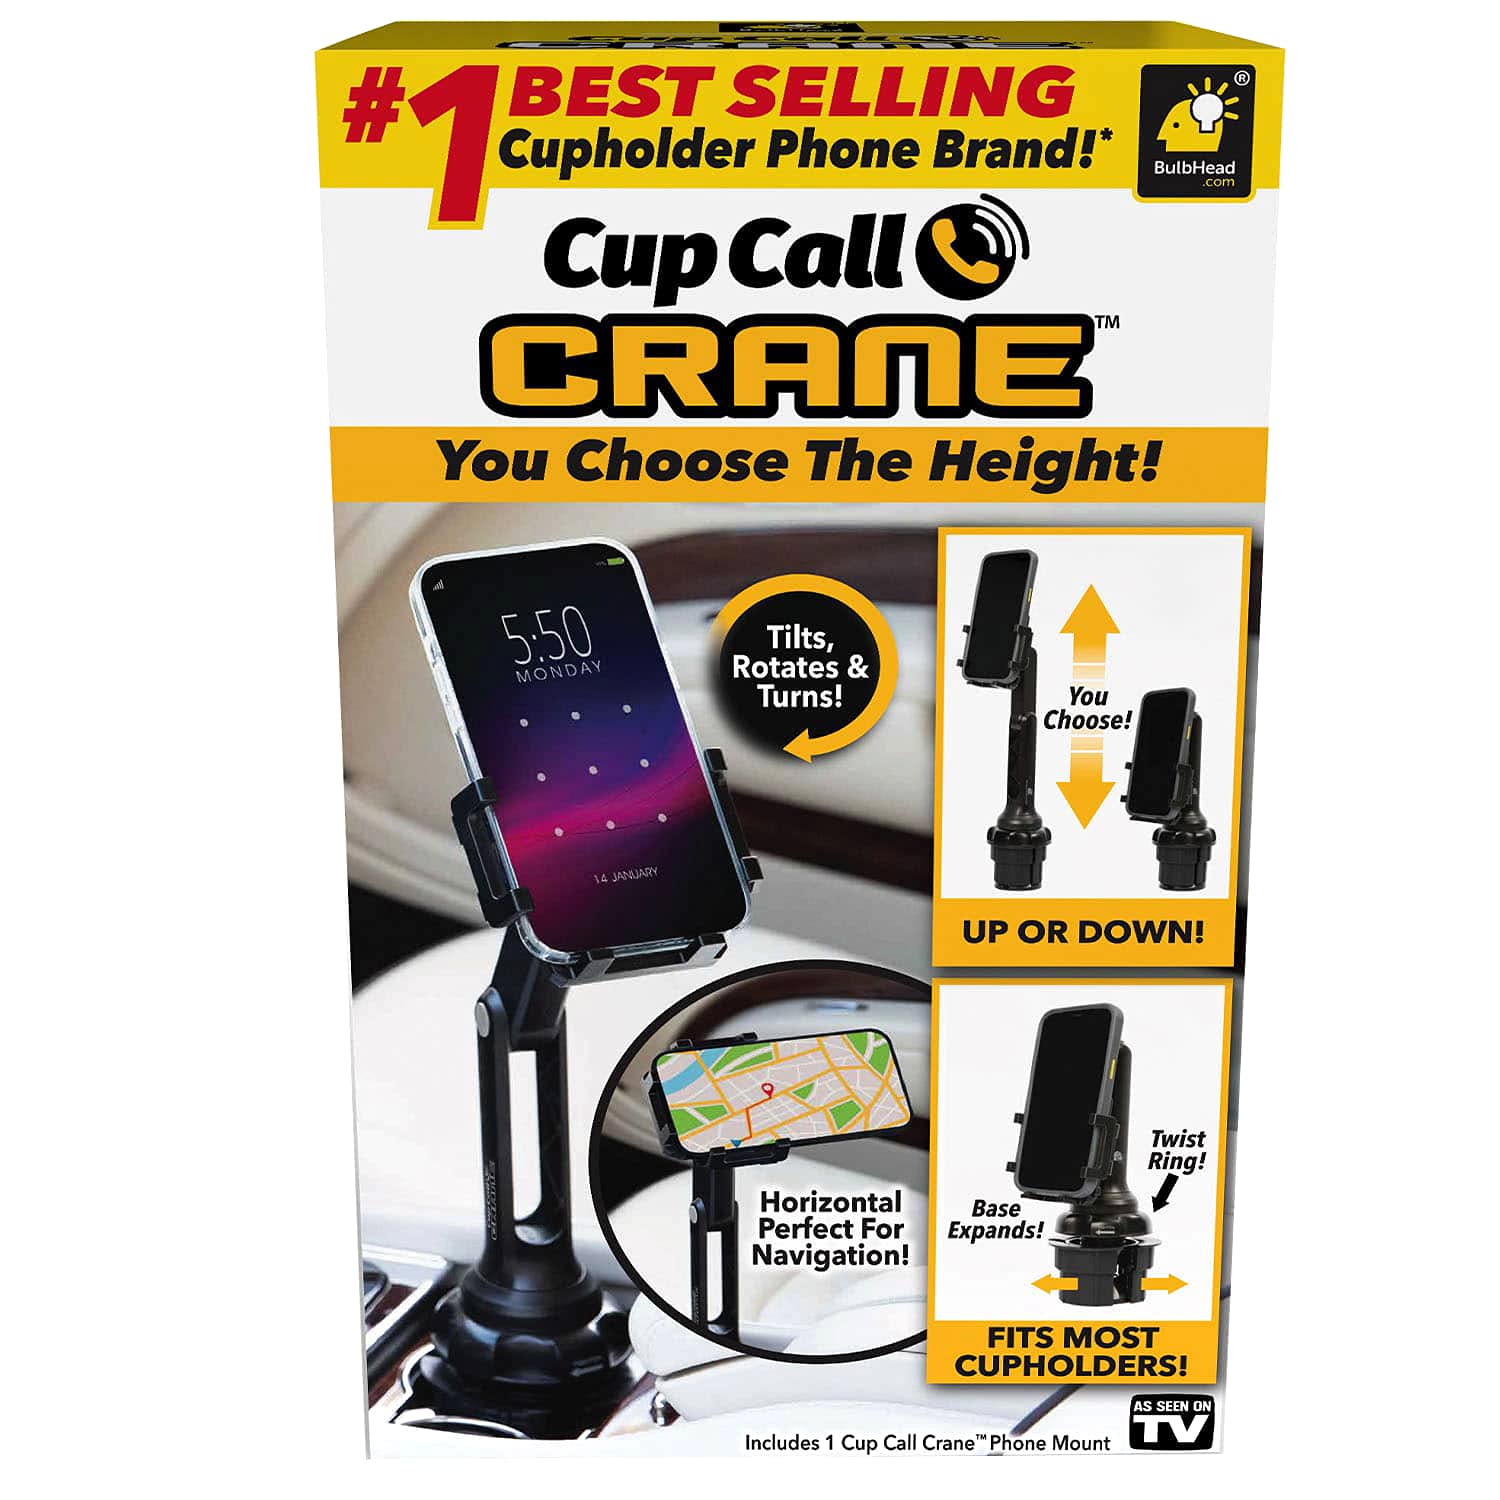 BulbHead Phone Crane Mount for Car, As Seen On TV, Ultra-Long Arm Raises Over a Foot Higher, Drive Safer, 360° Rotation, Vertical & Horizontal Adjustment, Twistable Base Fits Any Cupholder